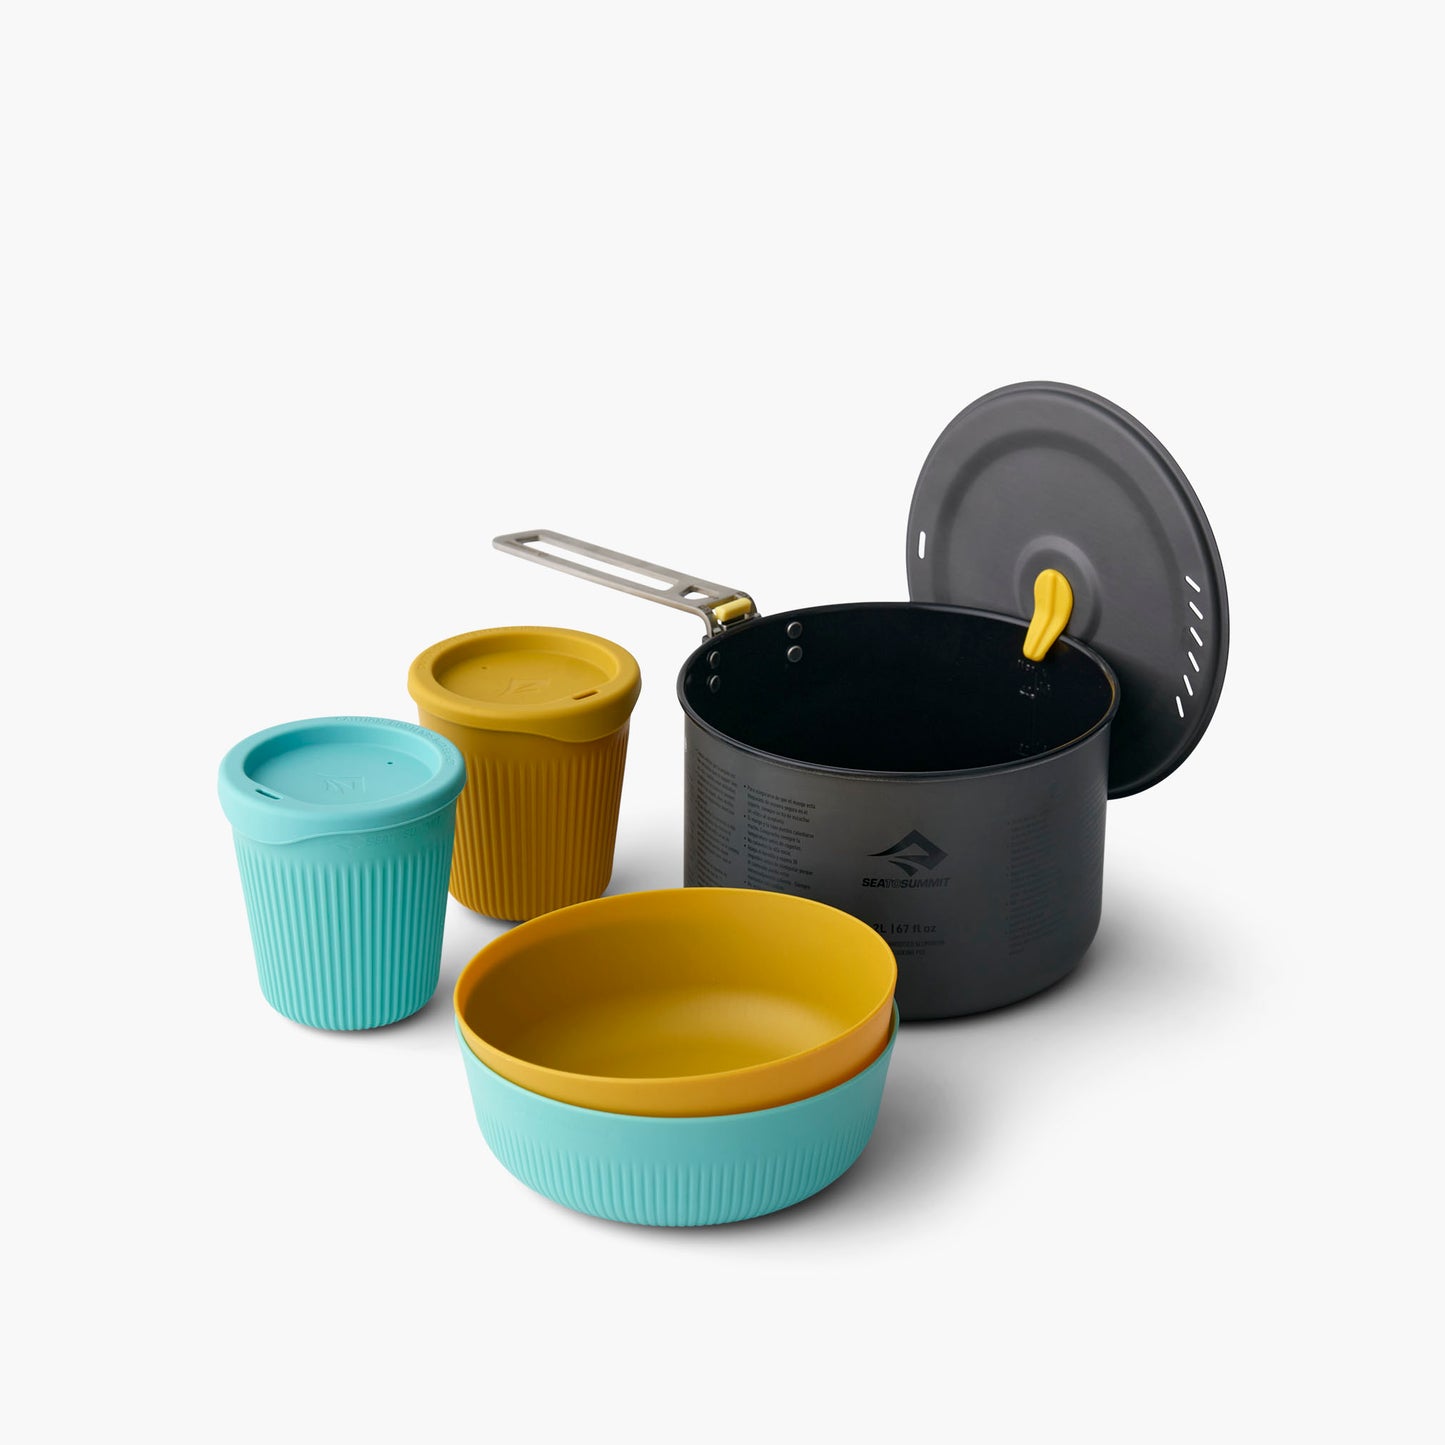 Sea To Summit Frontier UL One Pot Cook Set - 2P 5 Piece